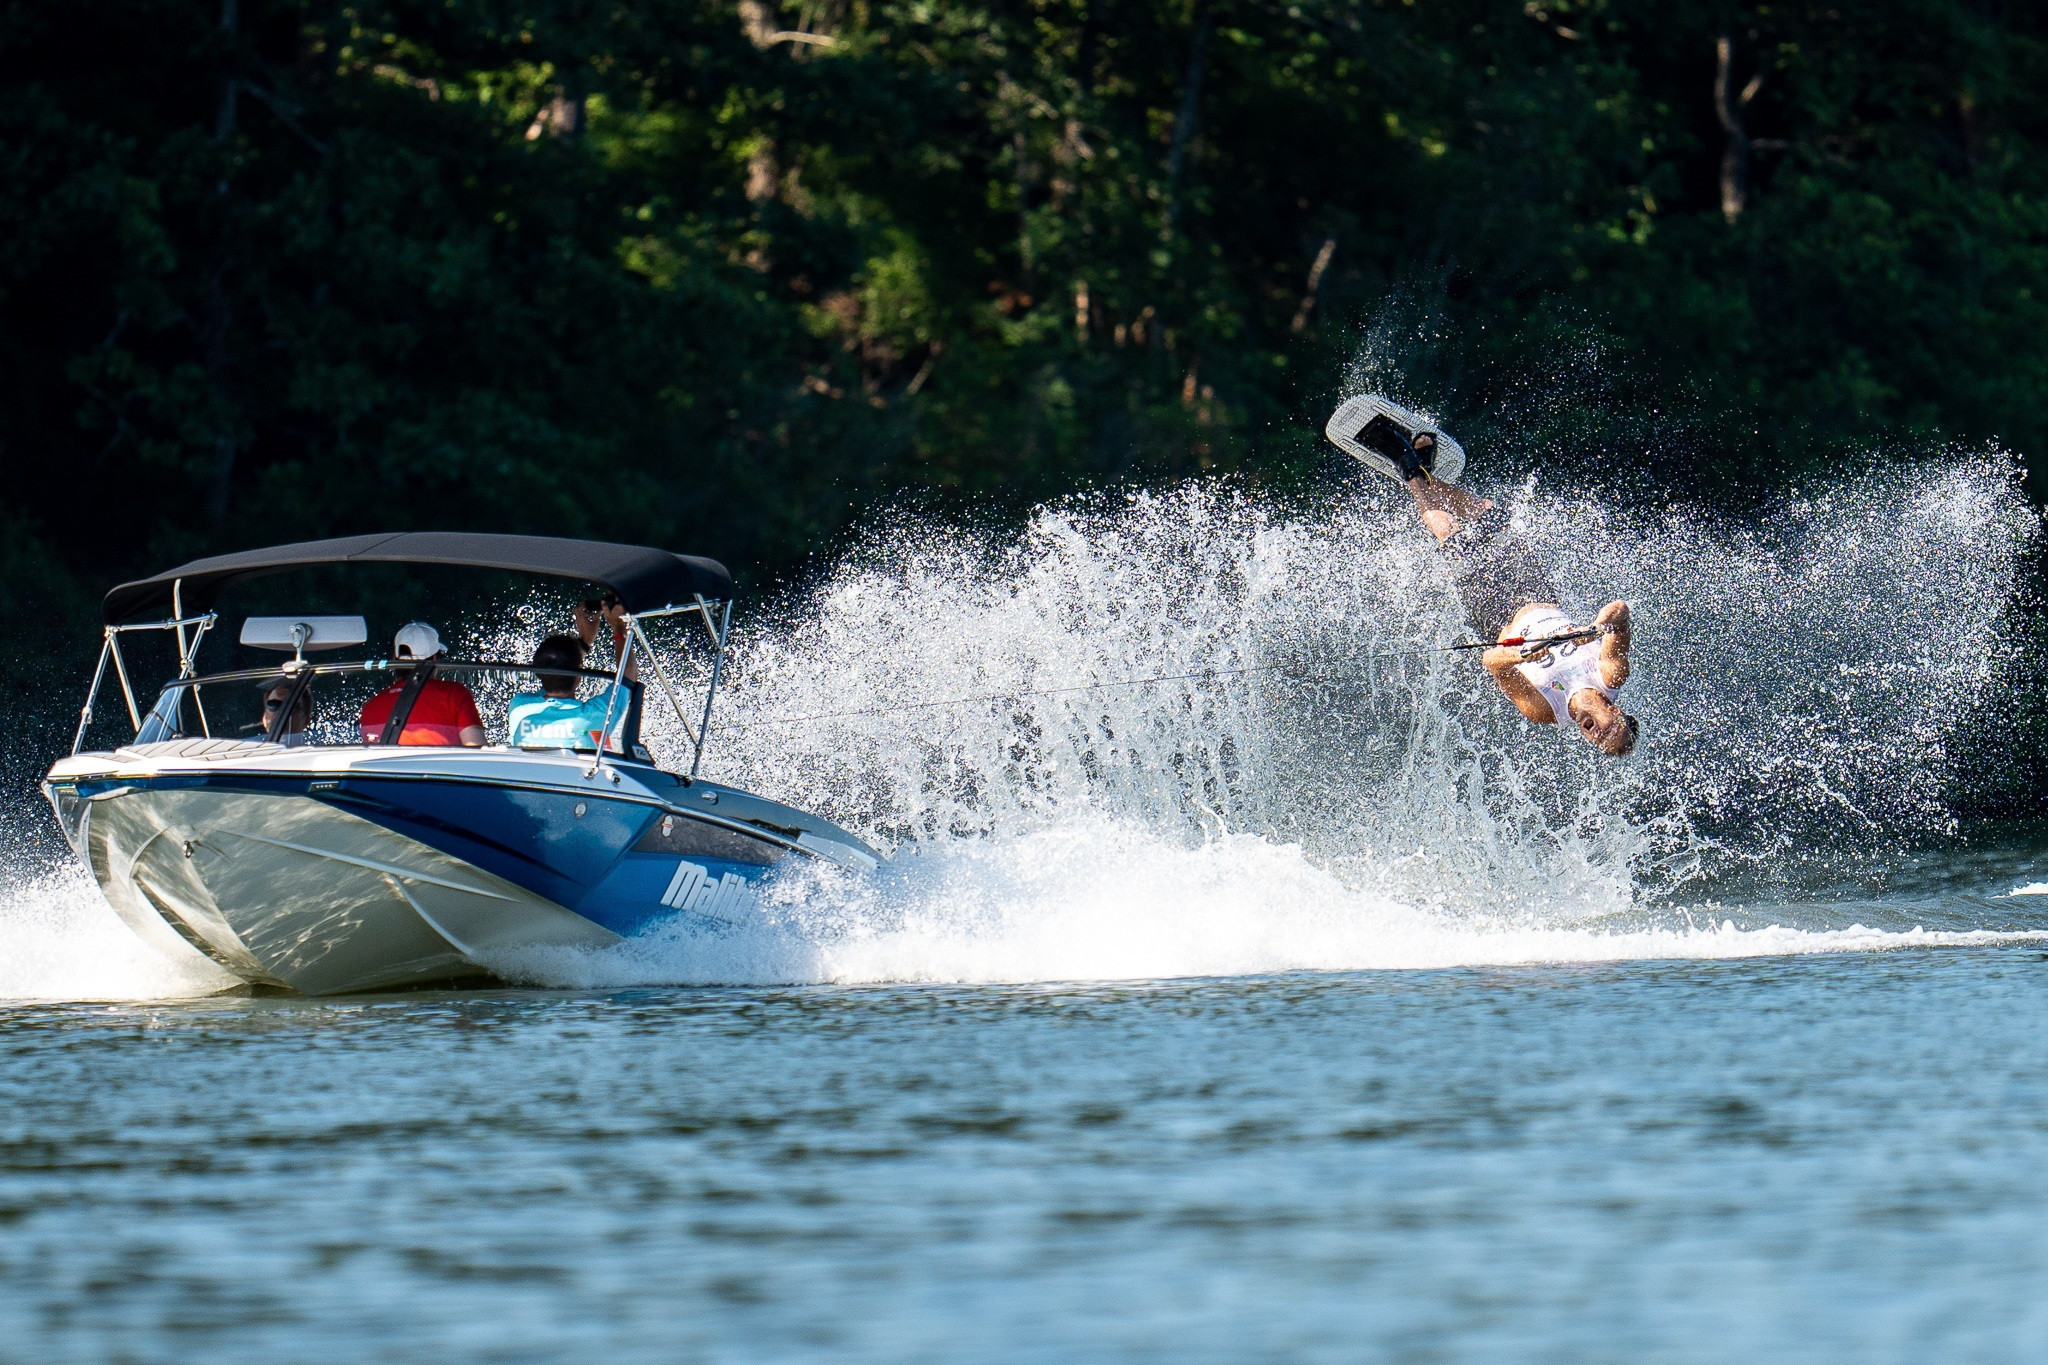 Waterski athletes put on a show in the men's trick final ©The World Games 2022